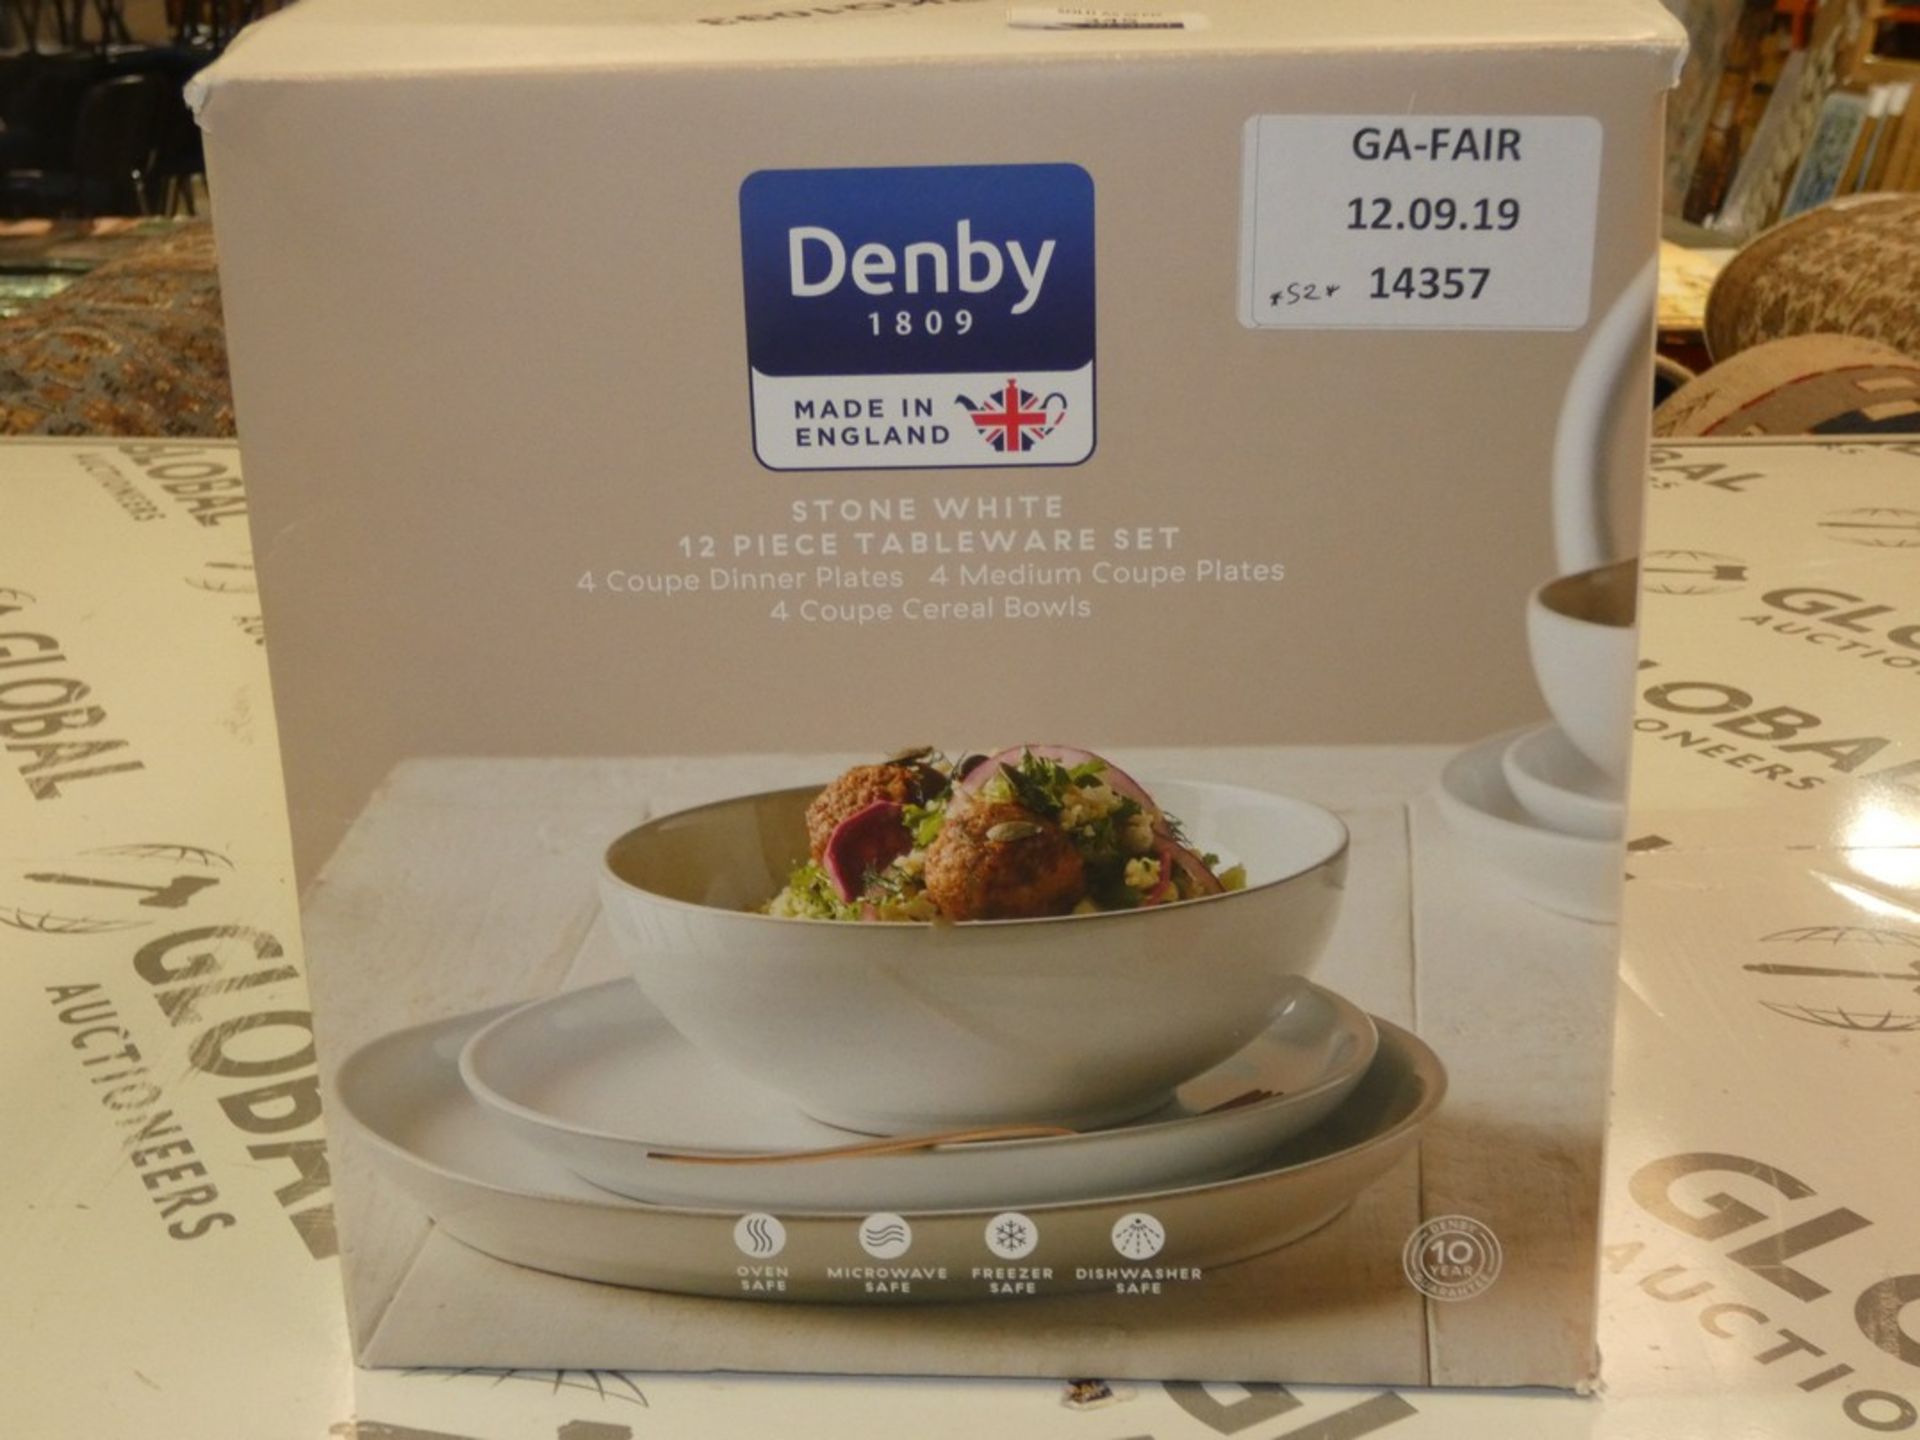 Boxed Denby 12 Piece Stone White Dinner Set RRP £55 (14357) (Public Viewing and Appraisals